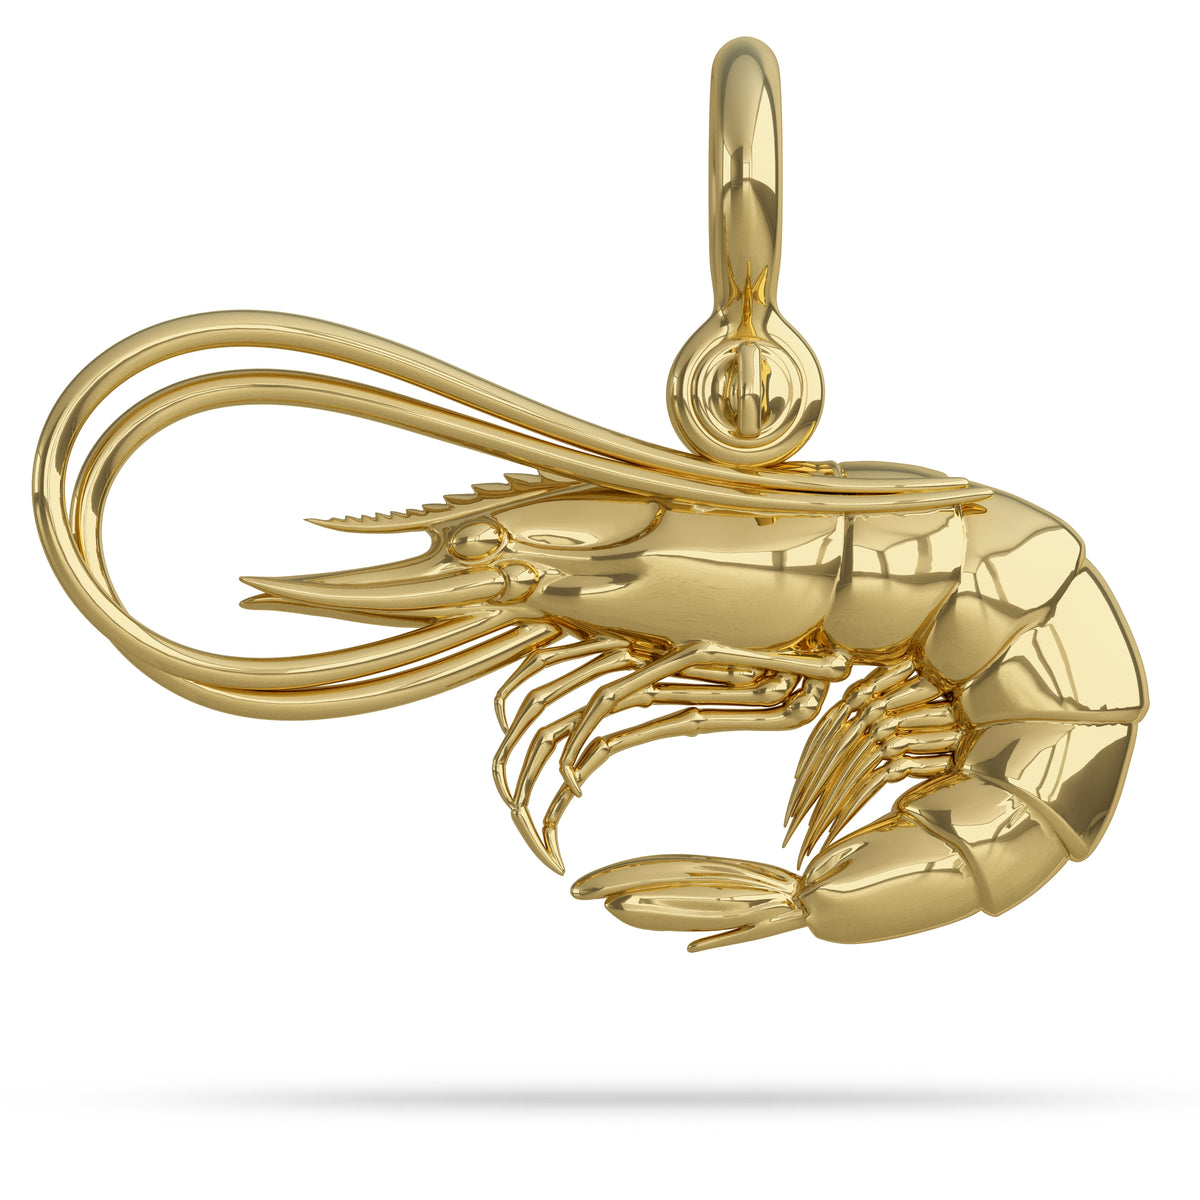 Solid 14k Shrimp Pendant High Polished Mirror Finished Center Hung on A Mariner Shackle Bail Custom Designed By Nautical Treasure Jewelry In The Florida Keys Key West Shrimper 